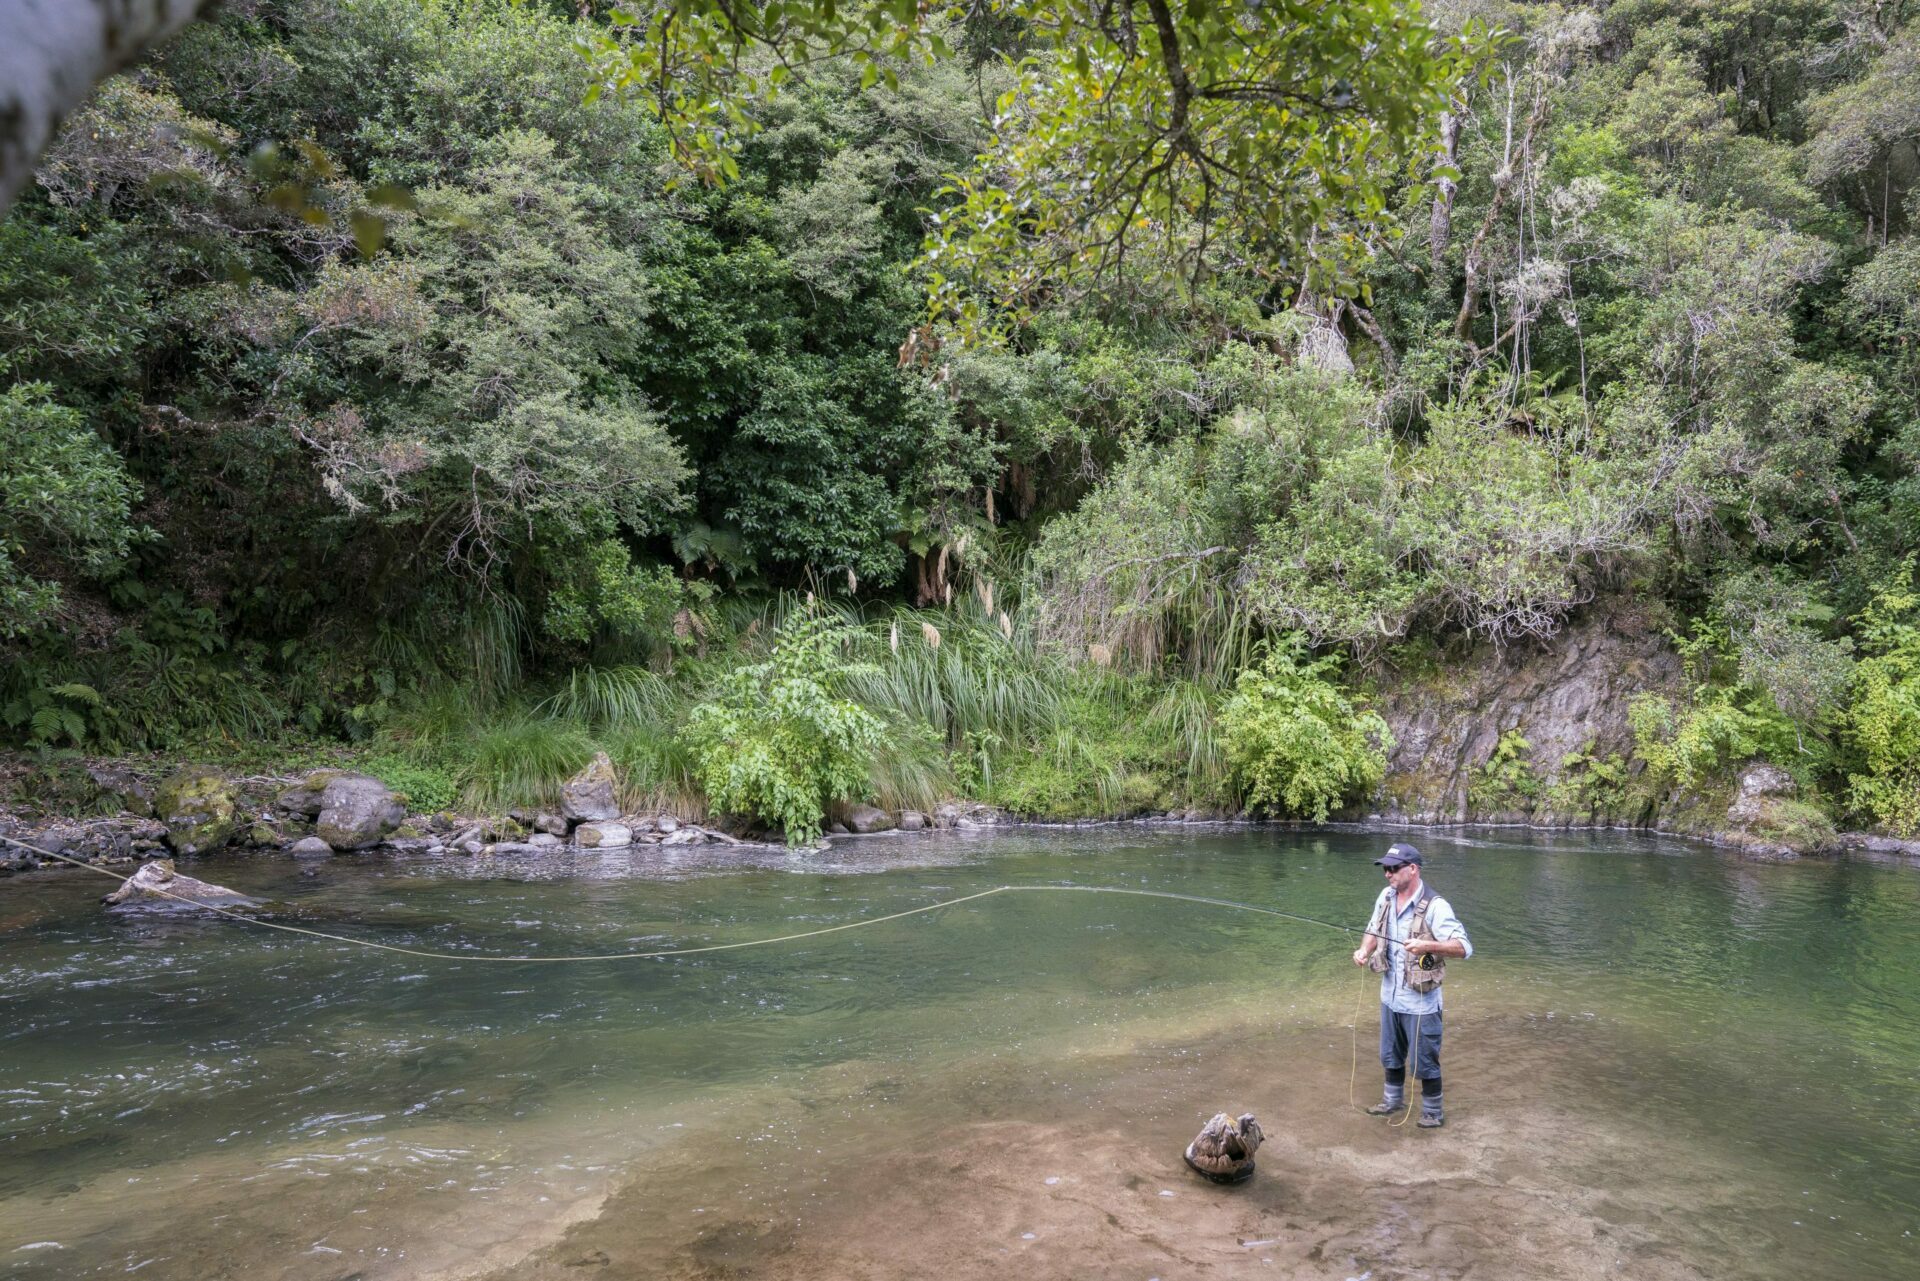 Fly fishing is a great way to get outdoors and enjoy nature. If you're new to the sport, our guided trips are the perfect way to learn the basics and catch trout in Taupo.